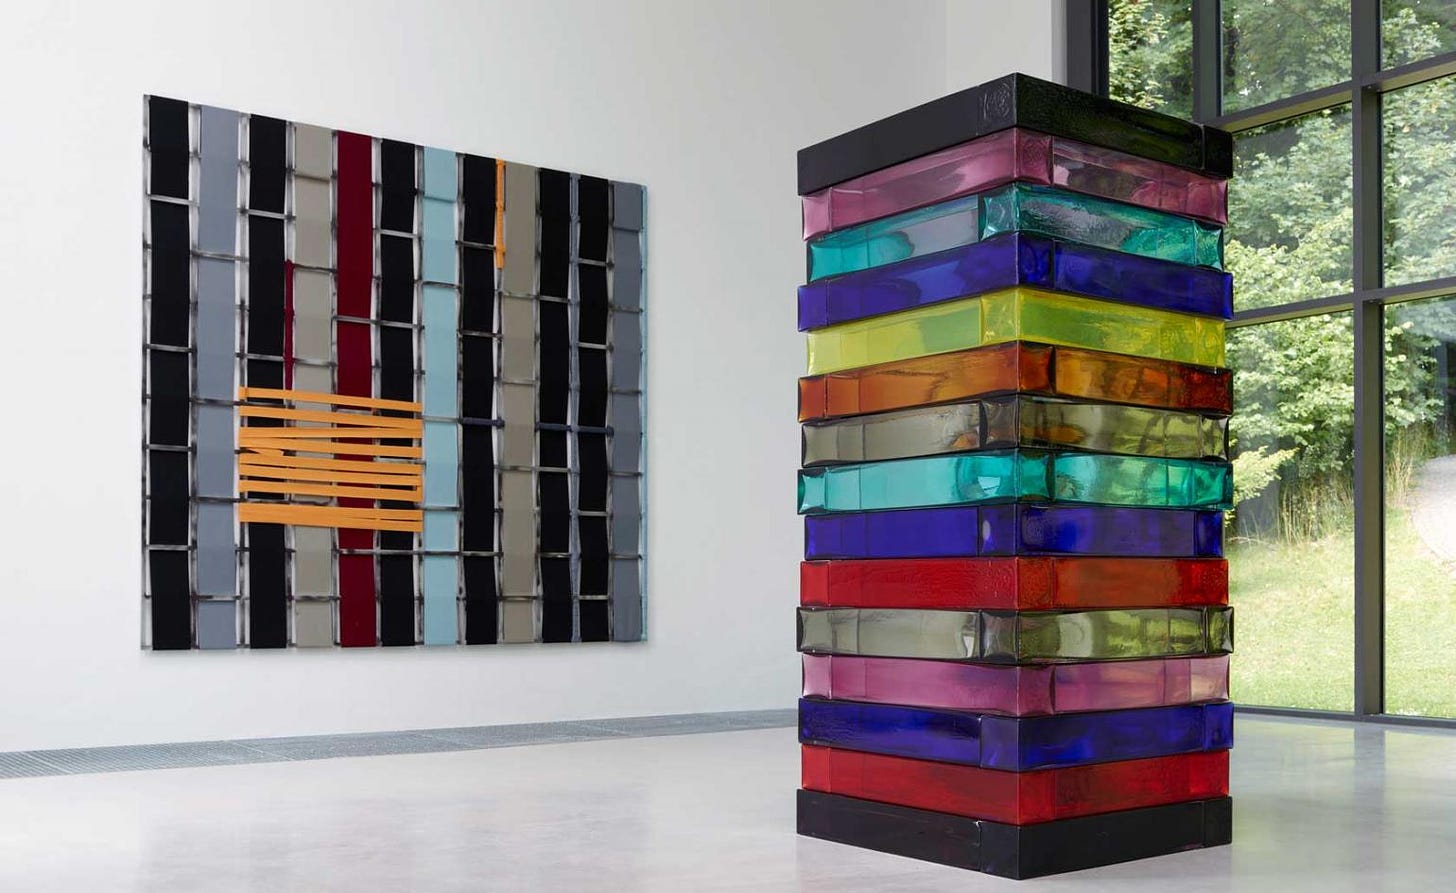 Sean Scully on six decades of rethinking abstraction | Wallpaper*